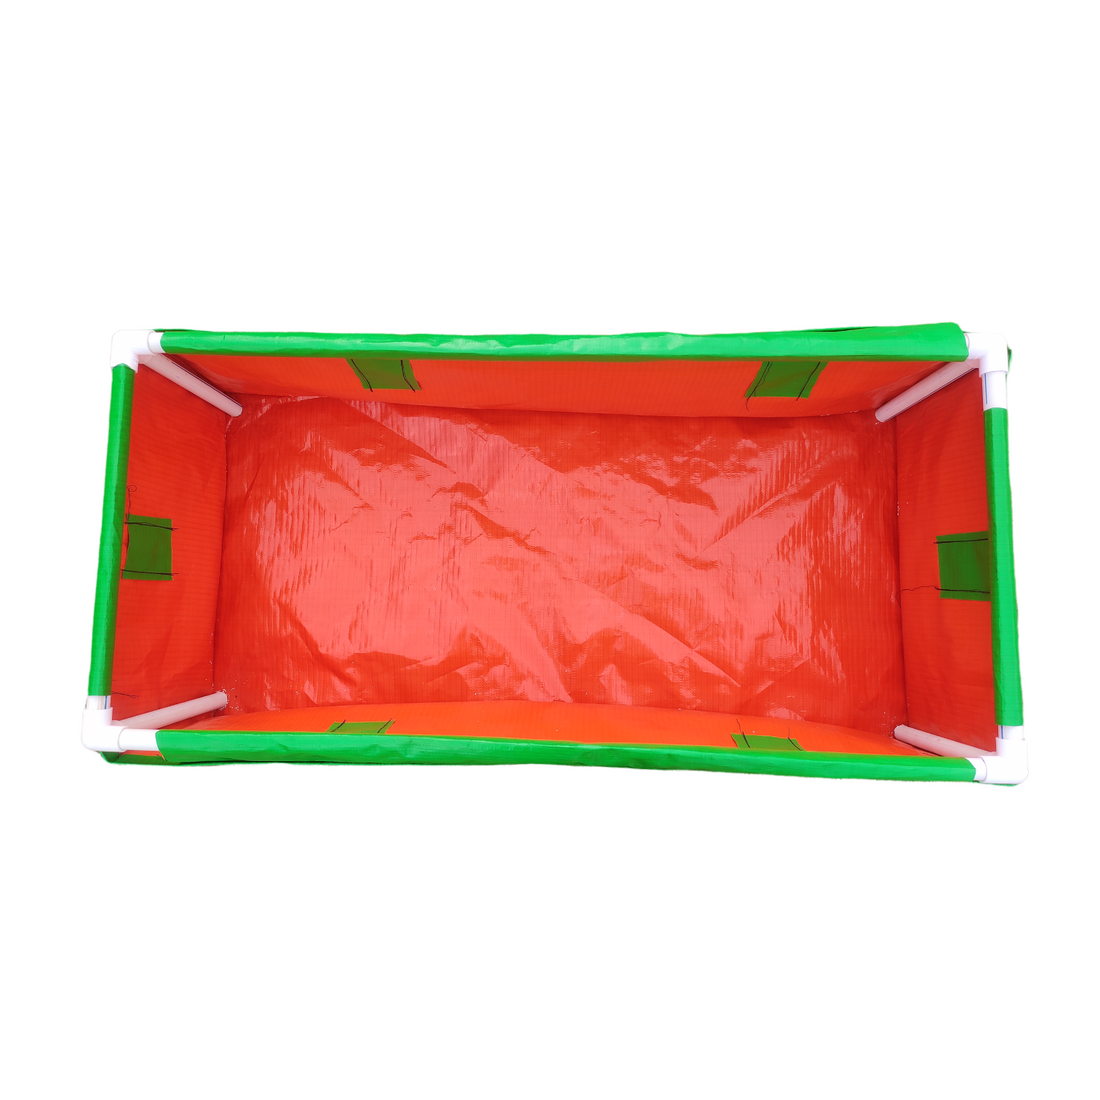 48x24x12 Inches (4x2x1 Ft) - 220 GSM HDPE Rectangular Grow Bag With Supporting PVC Pipes